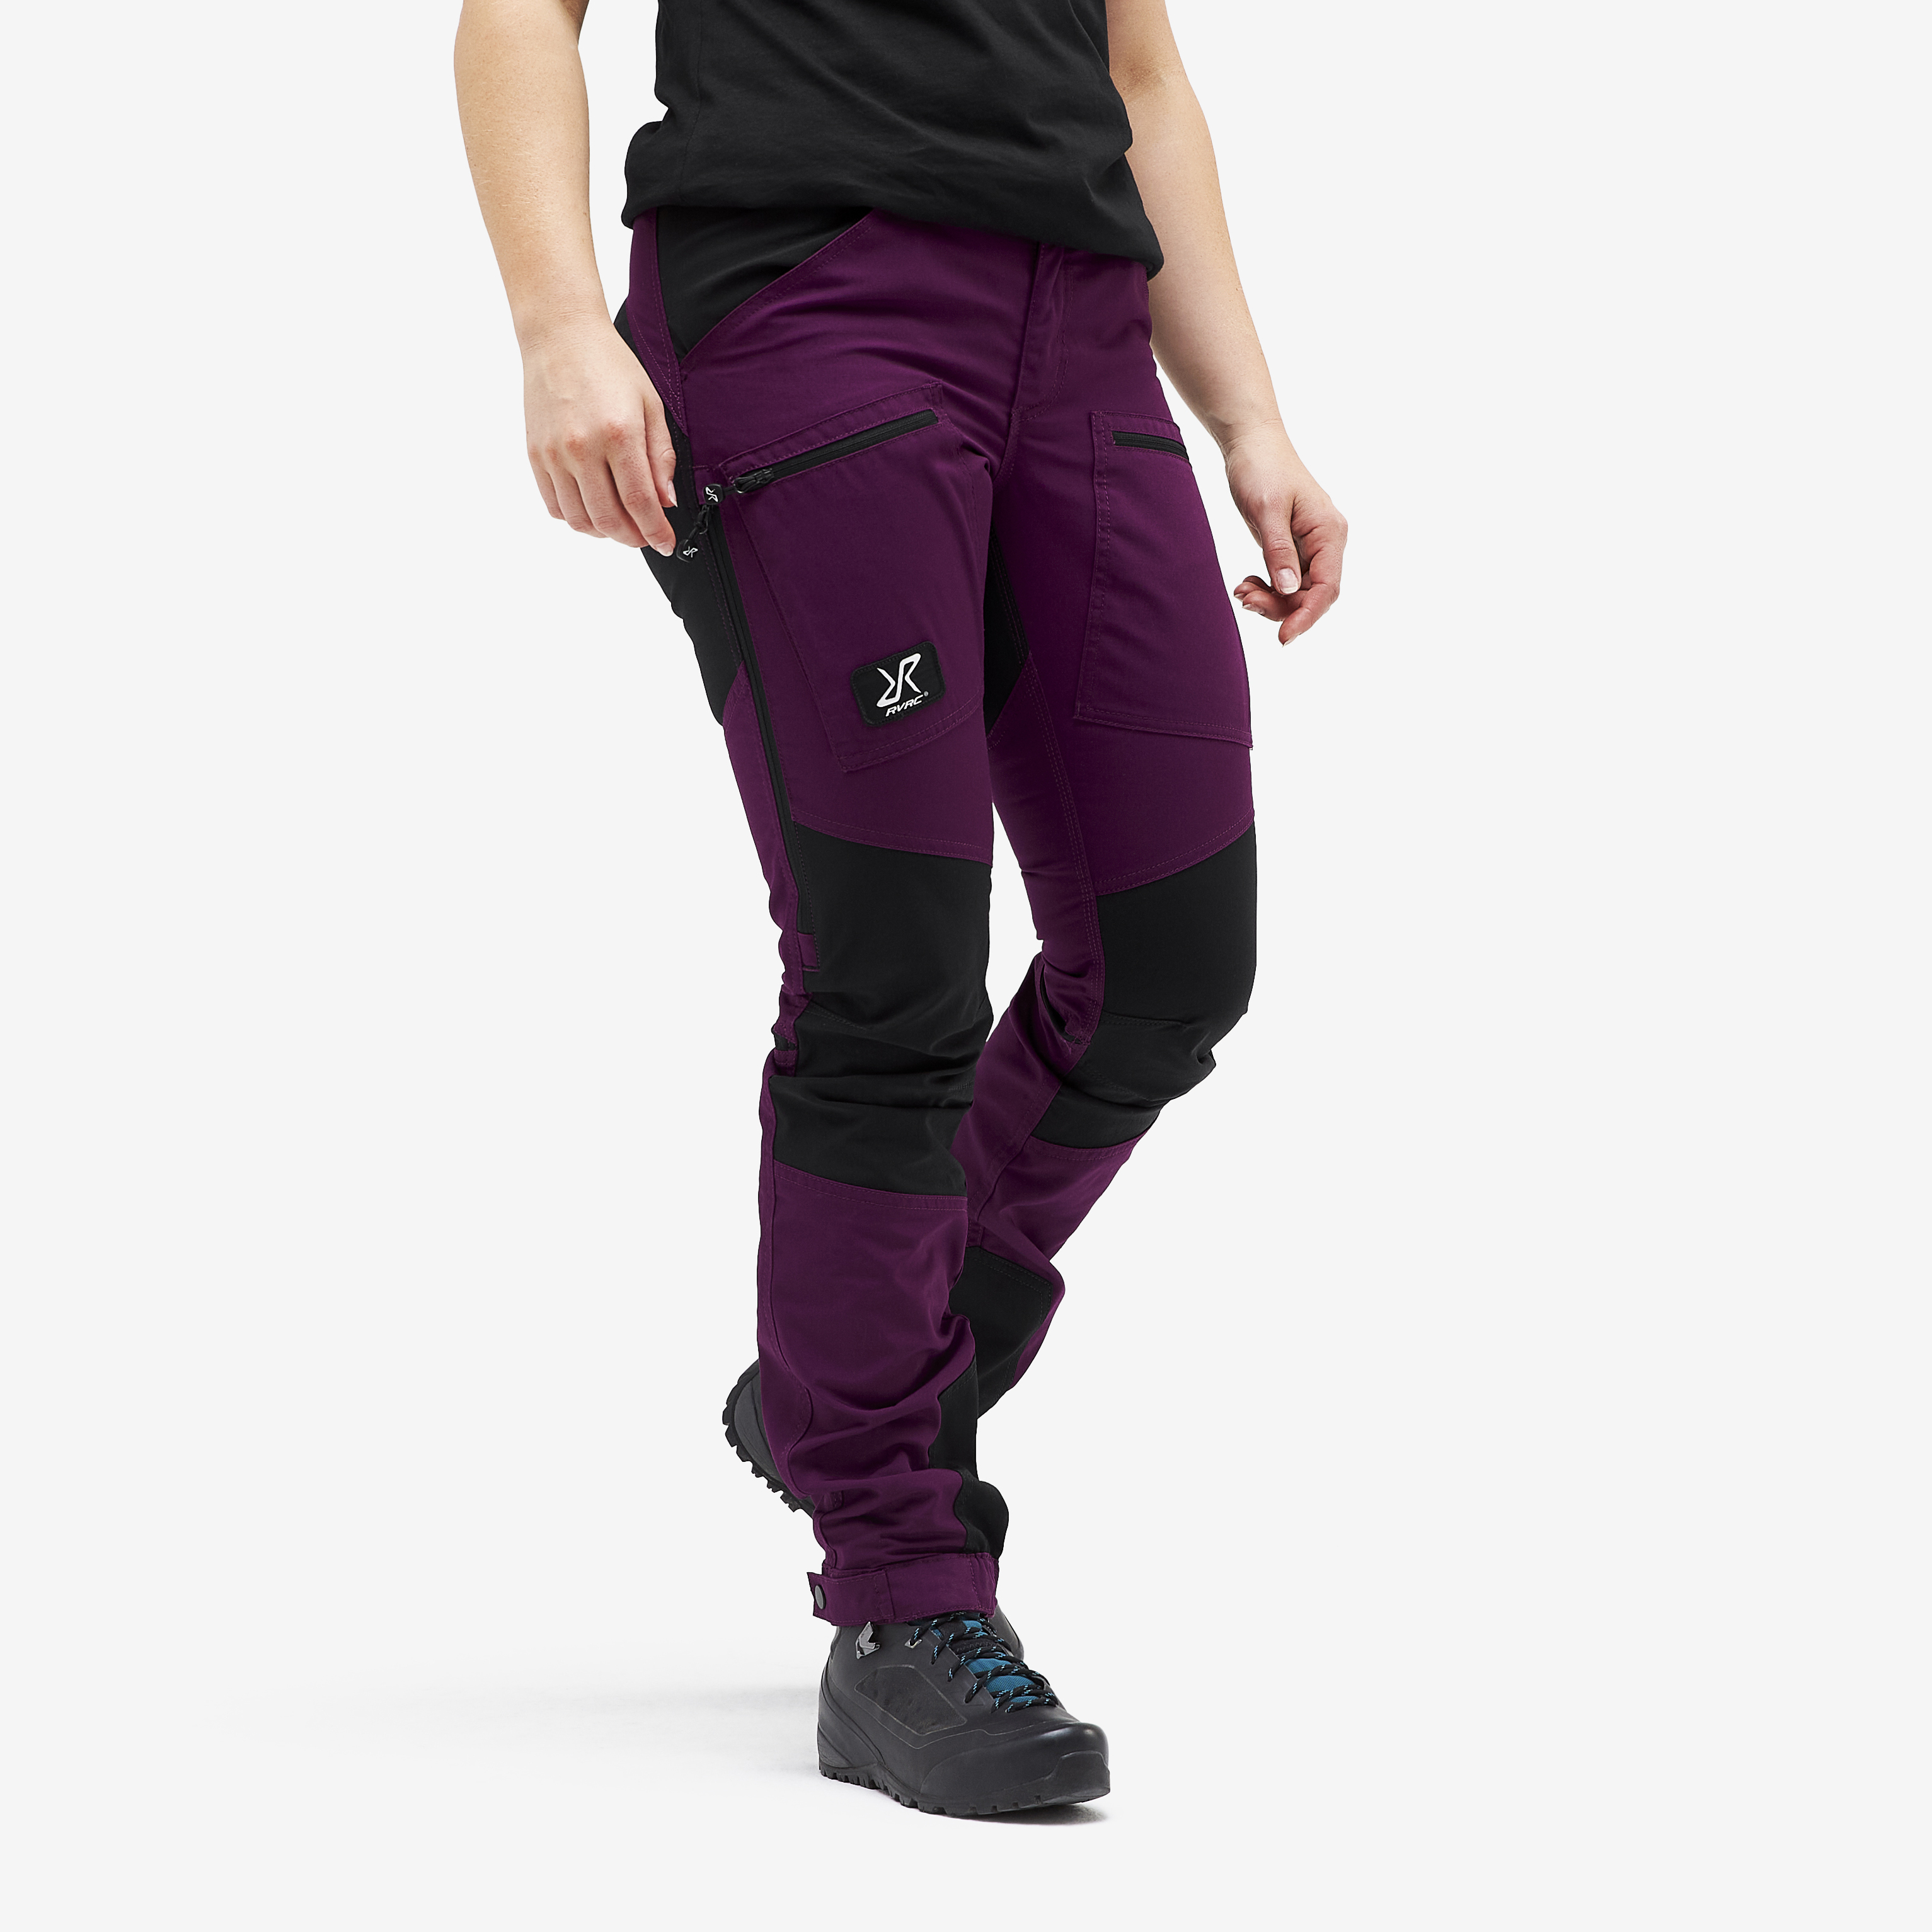 Nordwand Pro hiking pants for women in purple